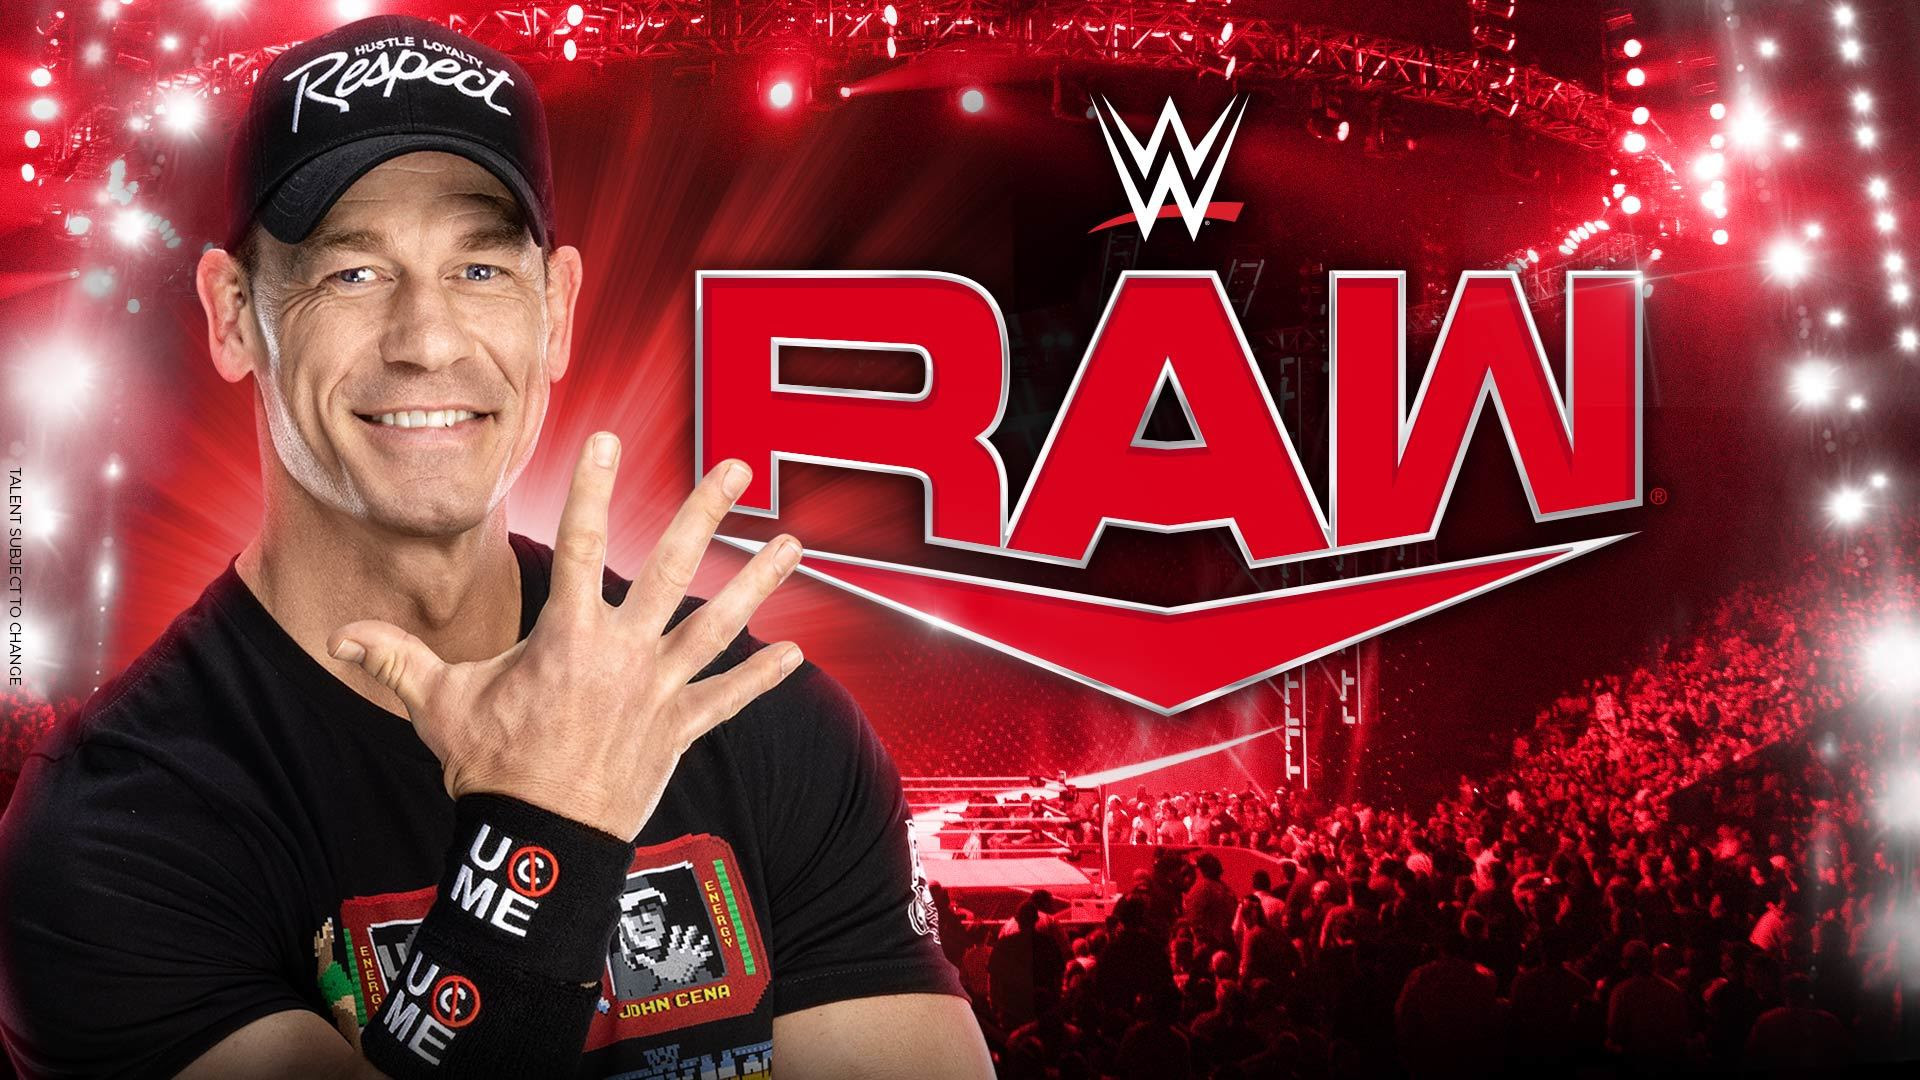 Wrestling Observer sent out an email this morning announcing that John Cena will appear on the March 6 episode of Raw in Boston